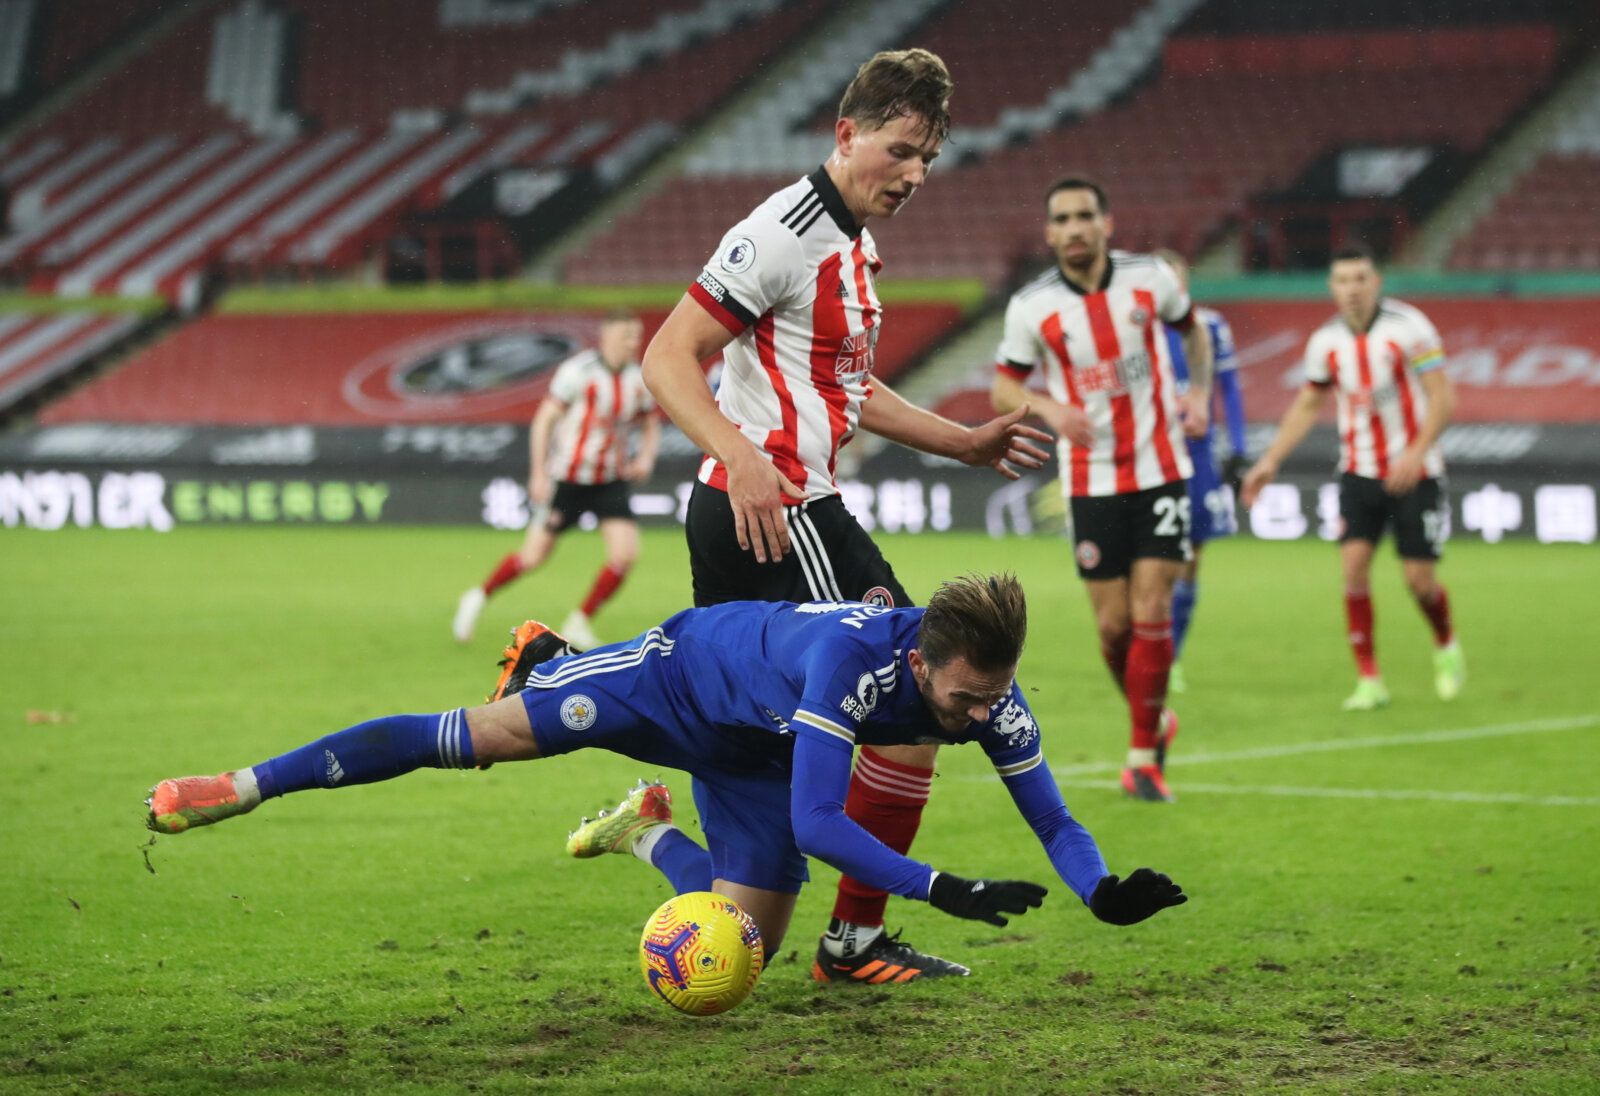 Soccer Football - Premier League - Sheffield United v Leicester City - Bramall Lane, Sheffield, Britain - December 6, 2020 Sheffield United's Sander Berge in action with Leicester City's James Maddison Pool via REUTERS/Nick Potts EDITORIAL USE ONLY. No use with unauthorized audio, video, data, fixture lists, club/league logos or 'live' services. Online in-match use limited to 75 images, no video emulation. No use in betting, games or single club /league/player publications.  Please contact your 